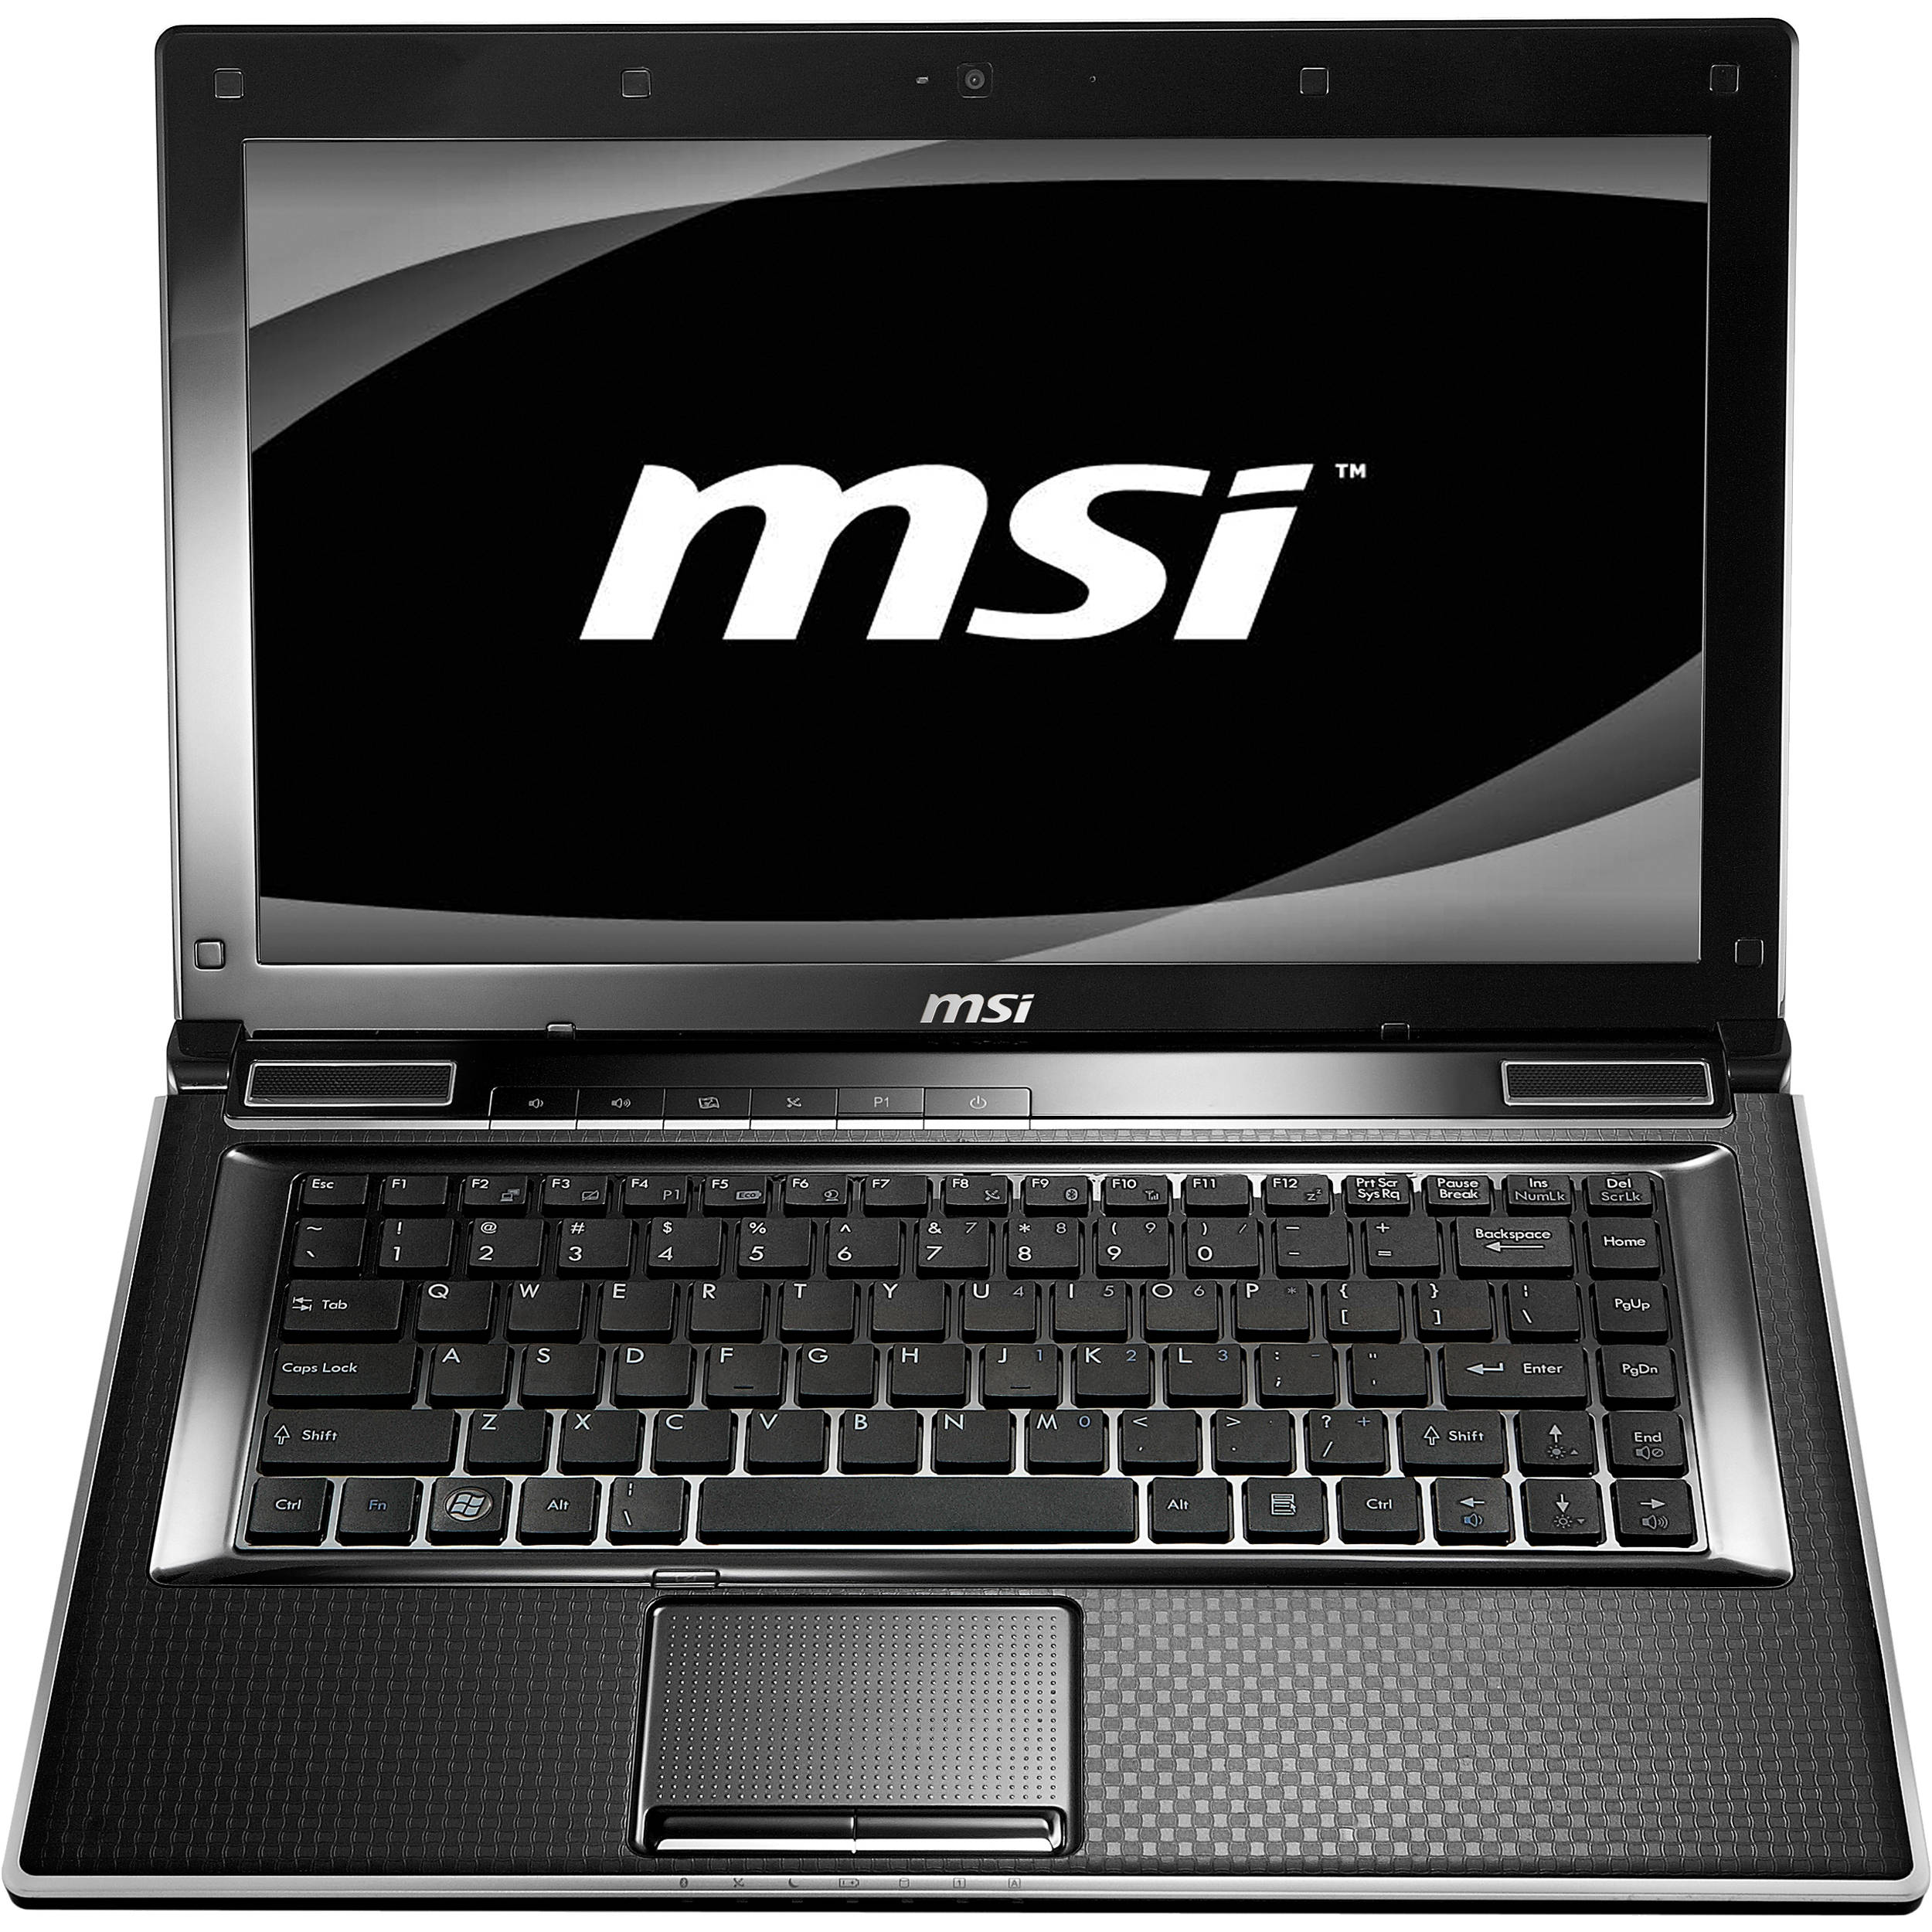 camera driver for msi laptop